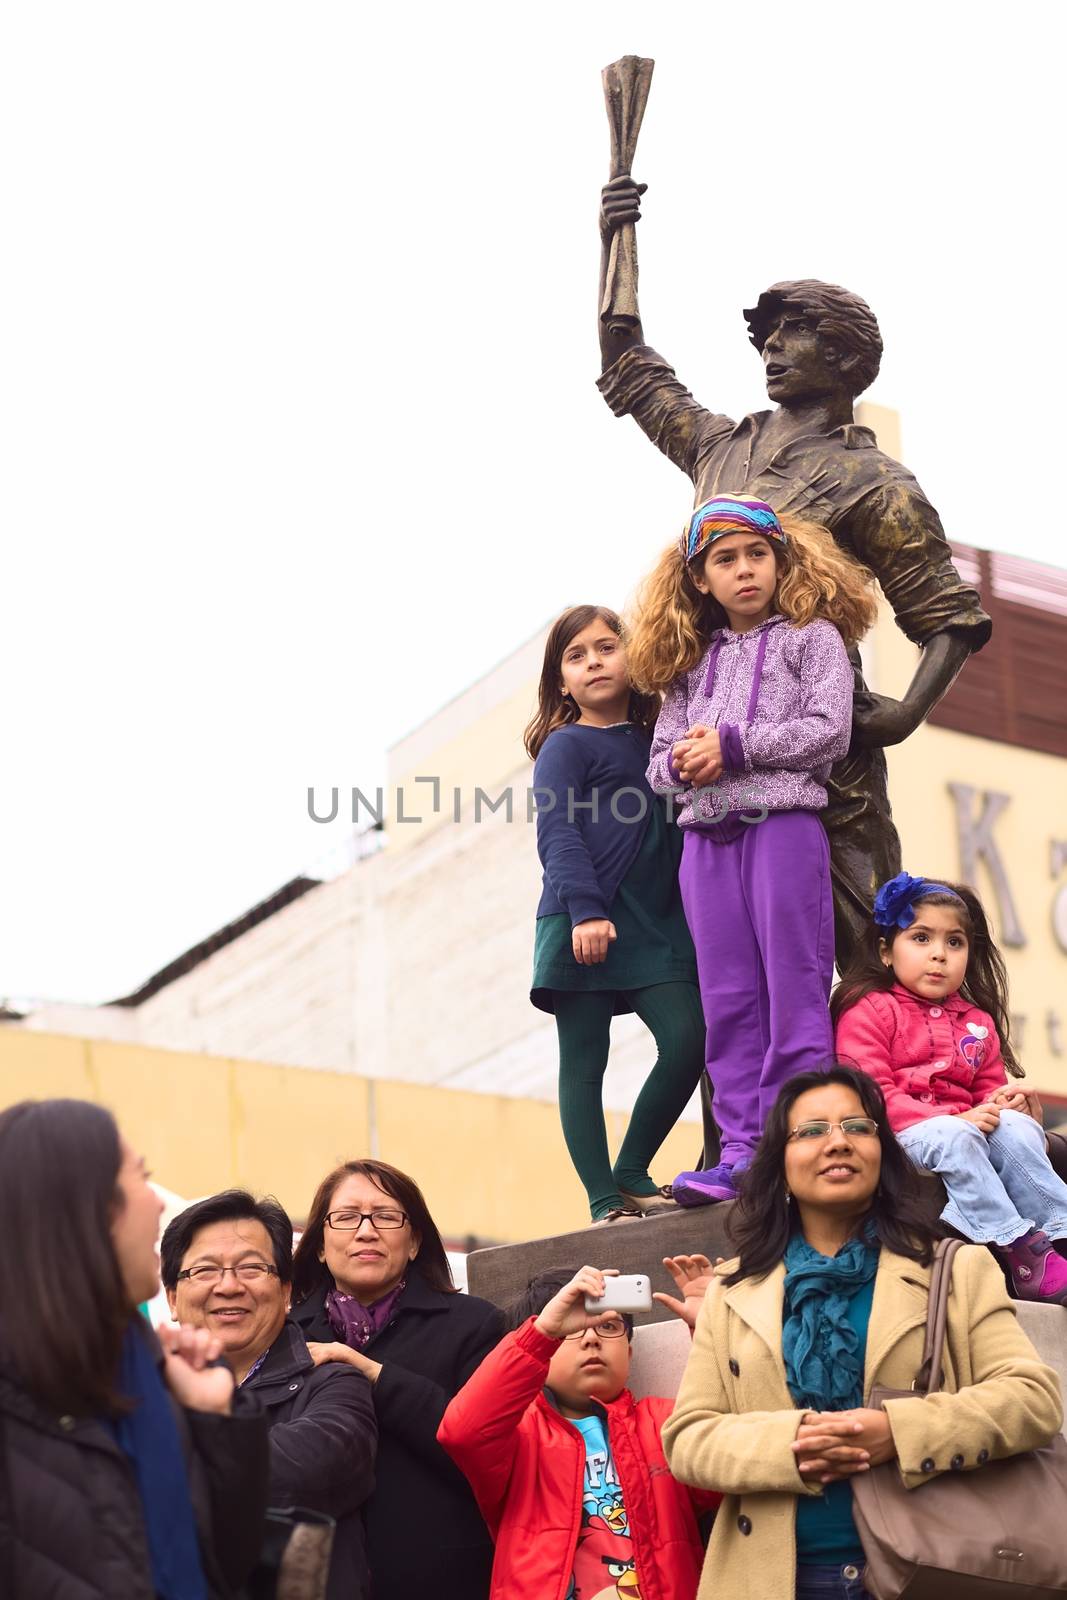 LIMA, PERU - JULY 21, 2013: Unidentified people watching the Parade of Wong from the statue of the "Lector" on Avenue Ricardo Palma at the Ovalo Miraflores on July 21, 2013 in Lima, Peru. The Parade (Gran Corso) is a traditional parade to celebrate the Peruvian national holiday which is on July 28-29. 